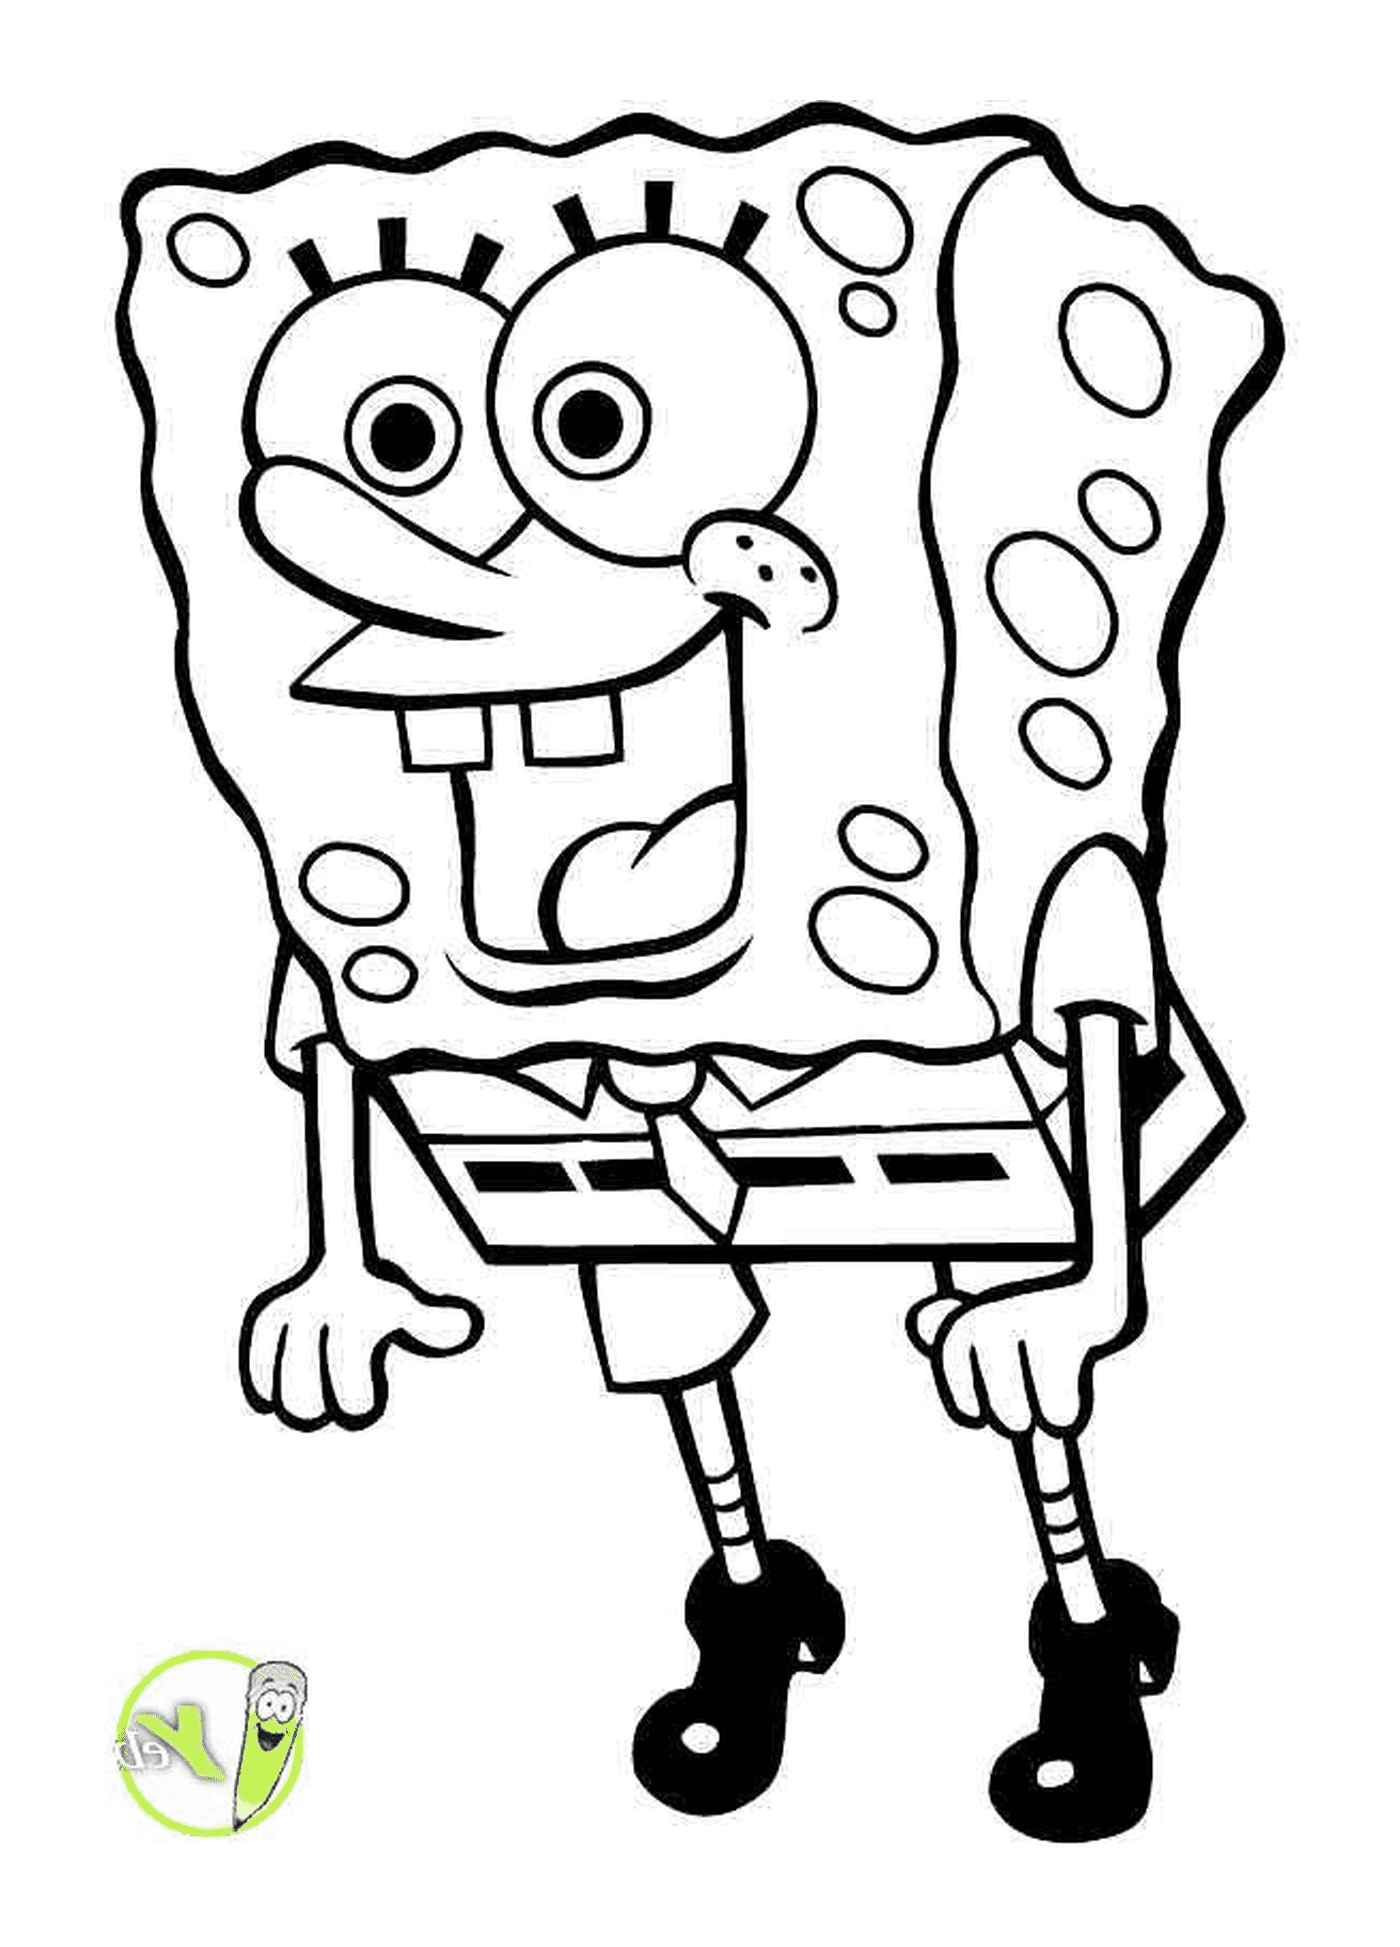  A character from SpongeBob 